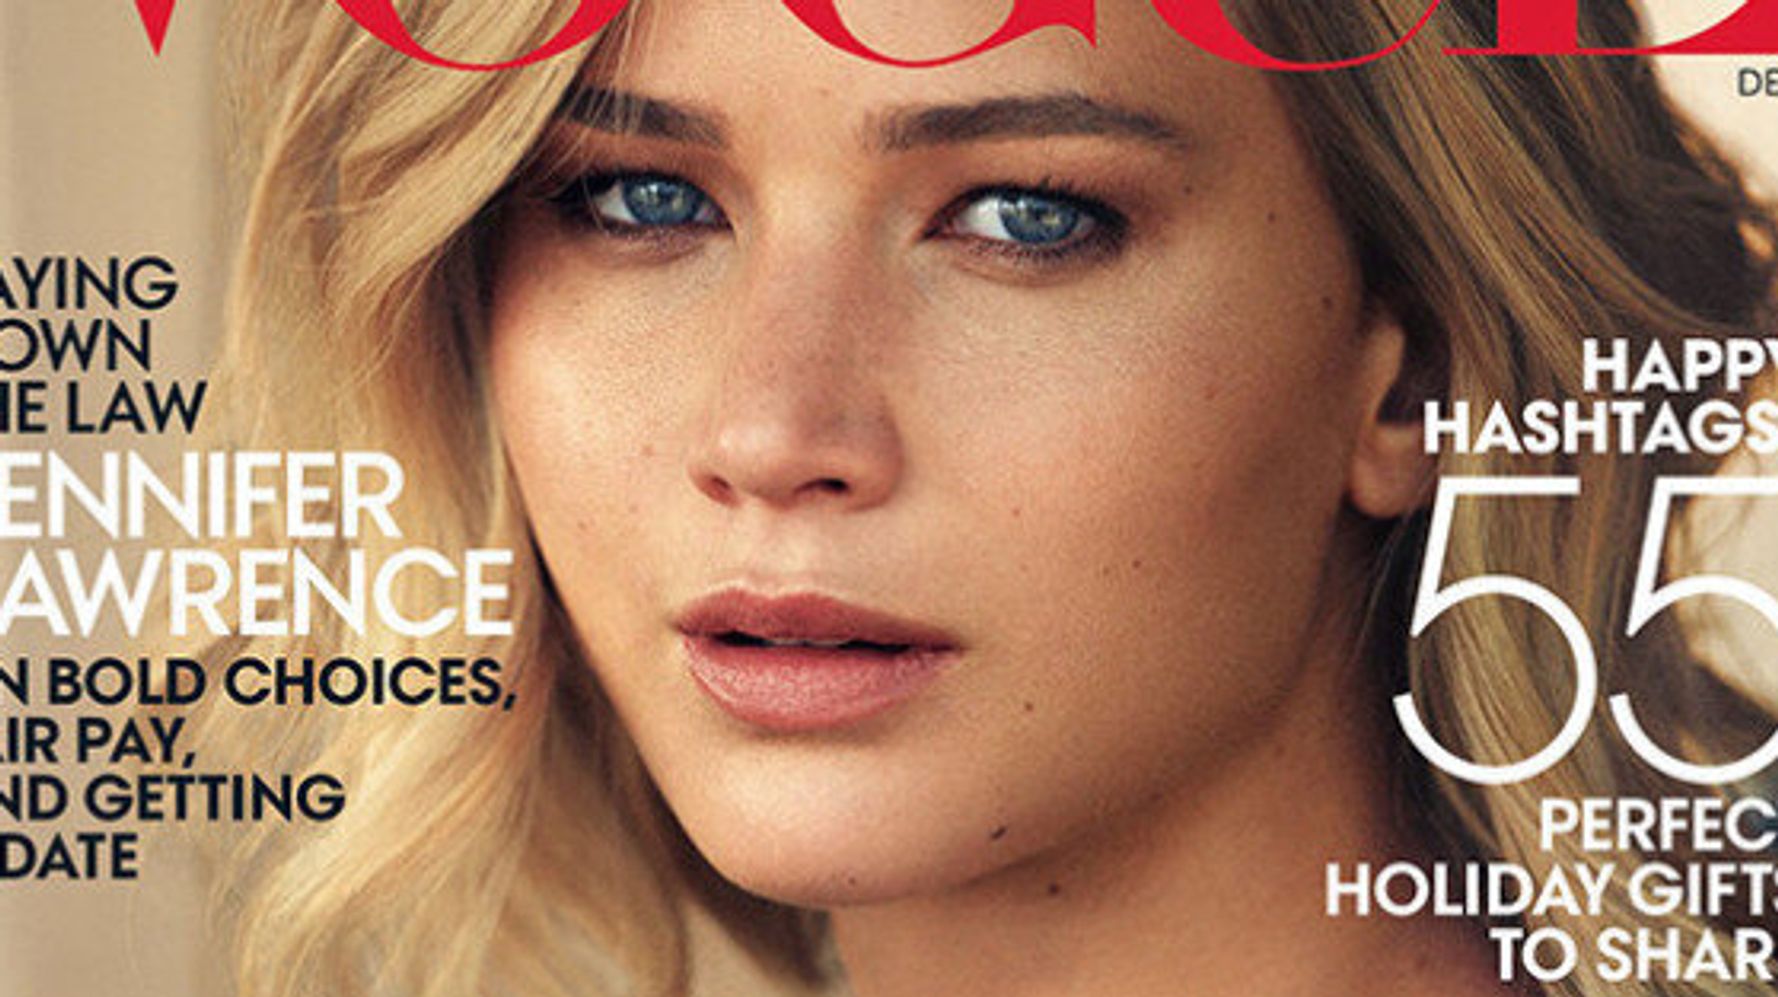 Jennifer Lawrence's Cover Story in Vogue Magazine's December 2015 Issue